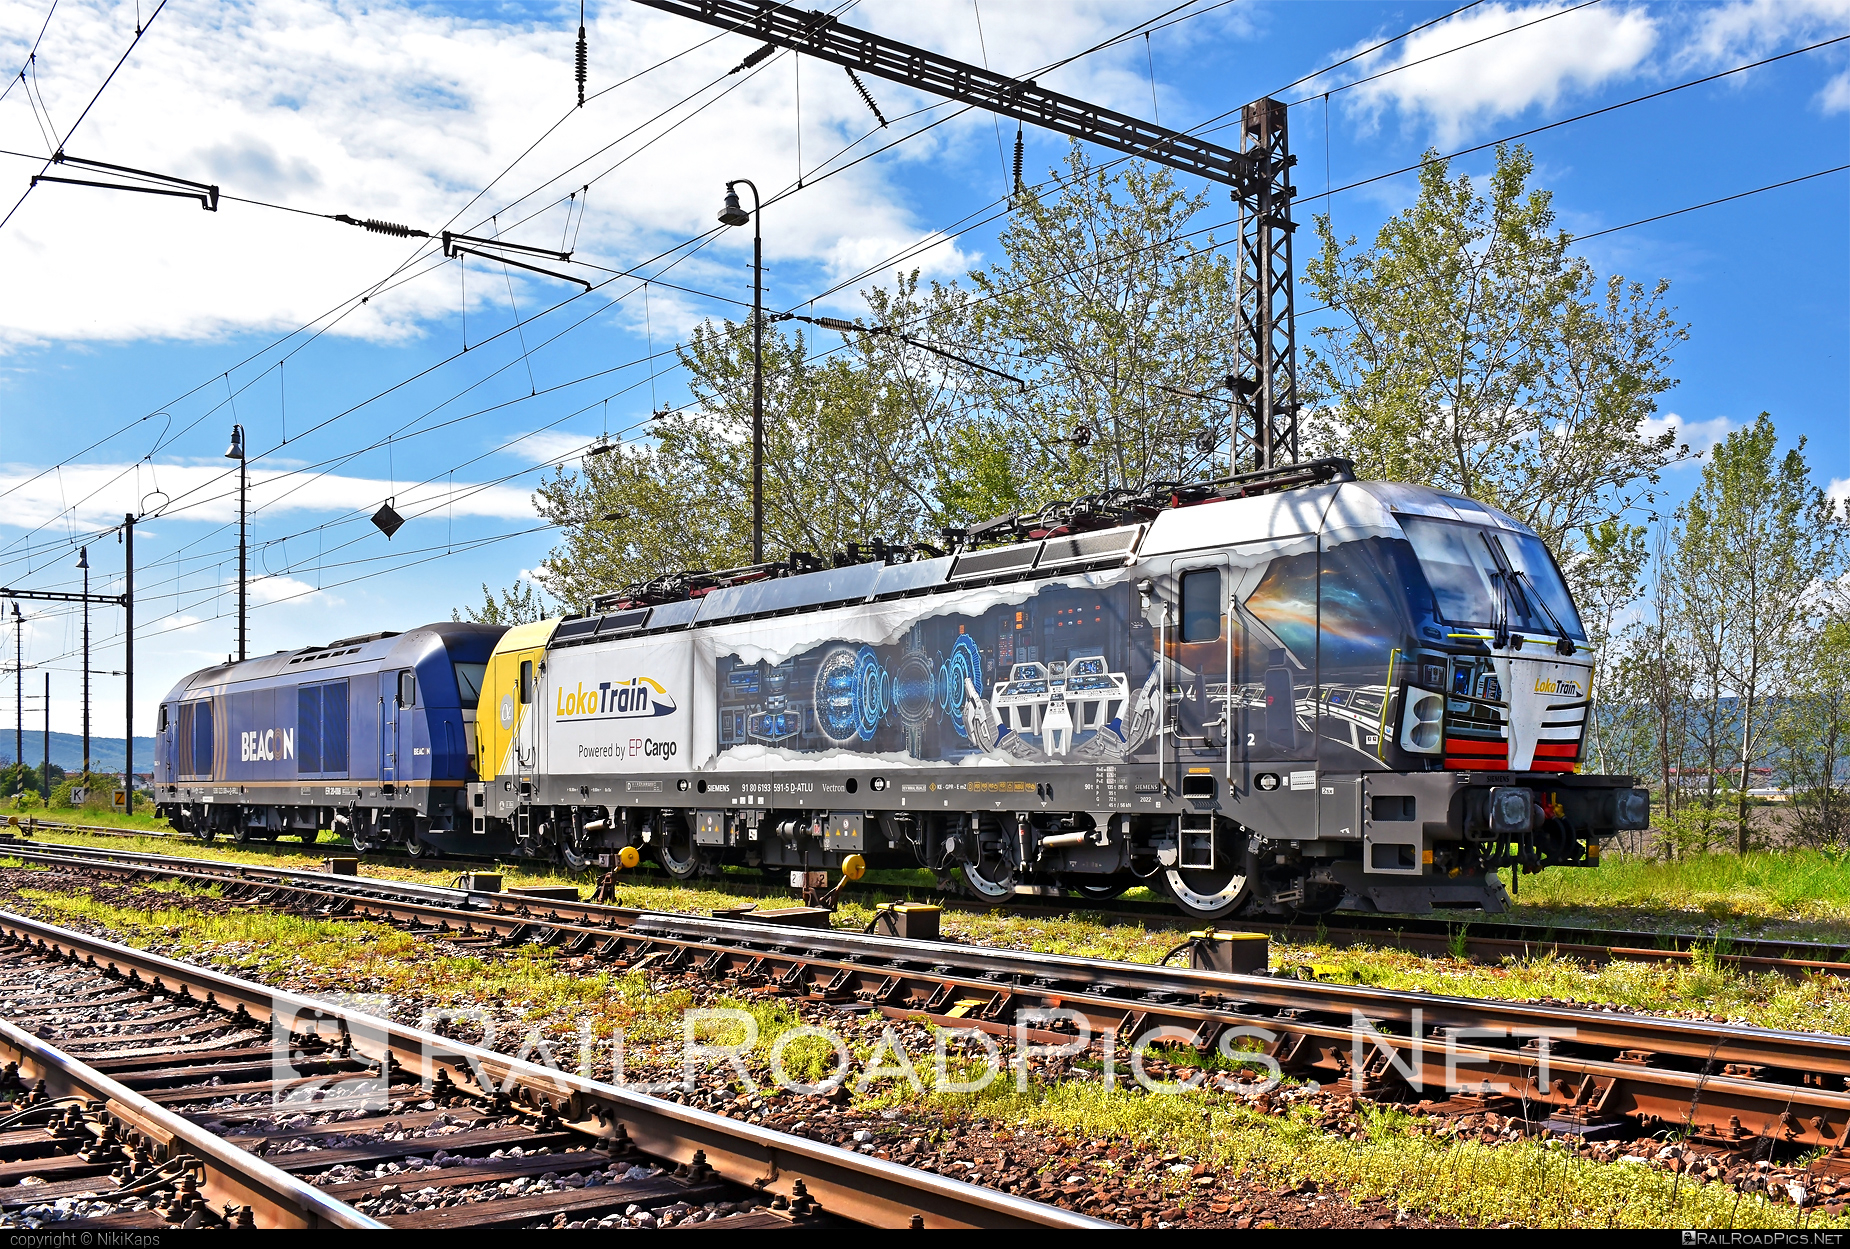 Siemens Vectron MS - 193 591-5 operated by EP Cargo a.s. #alphatrainsluxembourg #epcargo #epci #siemens #siemensVectron #siemensVectronMS #vectron #vectronMS